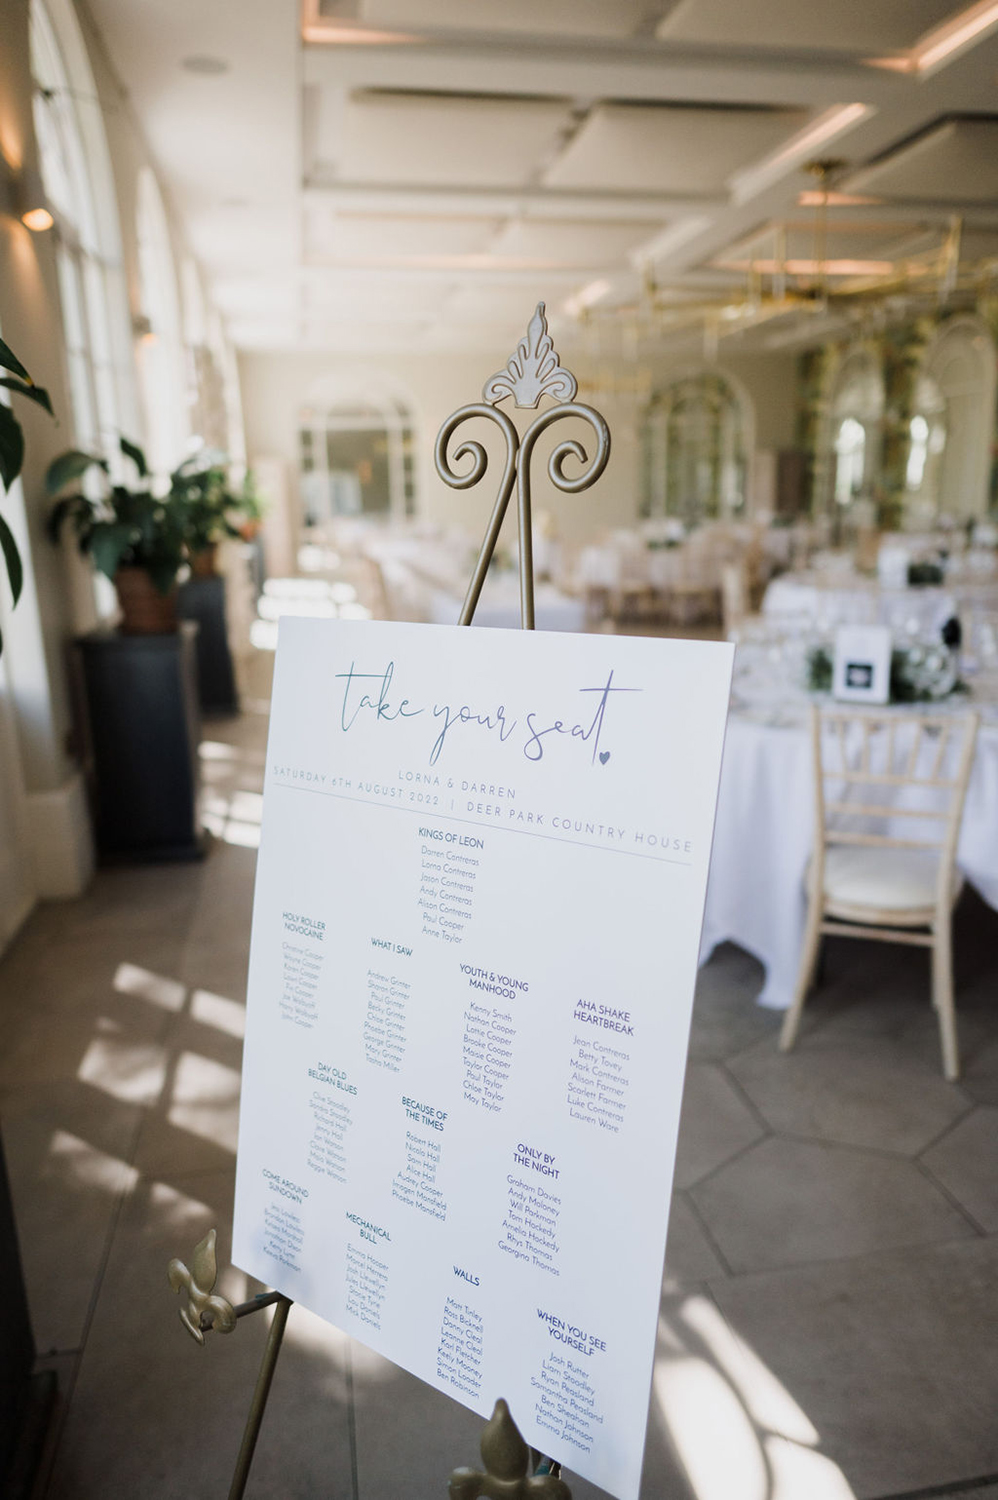 Liberty Pearl Photo & Film Collective Devon Wedding Photography at Deer Park Country House. Food menu and dining area.